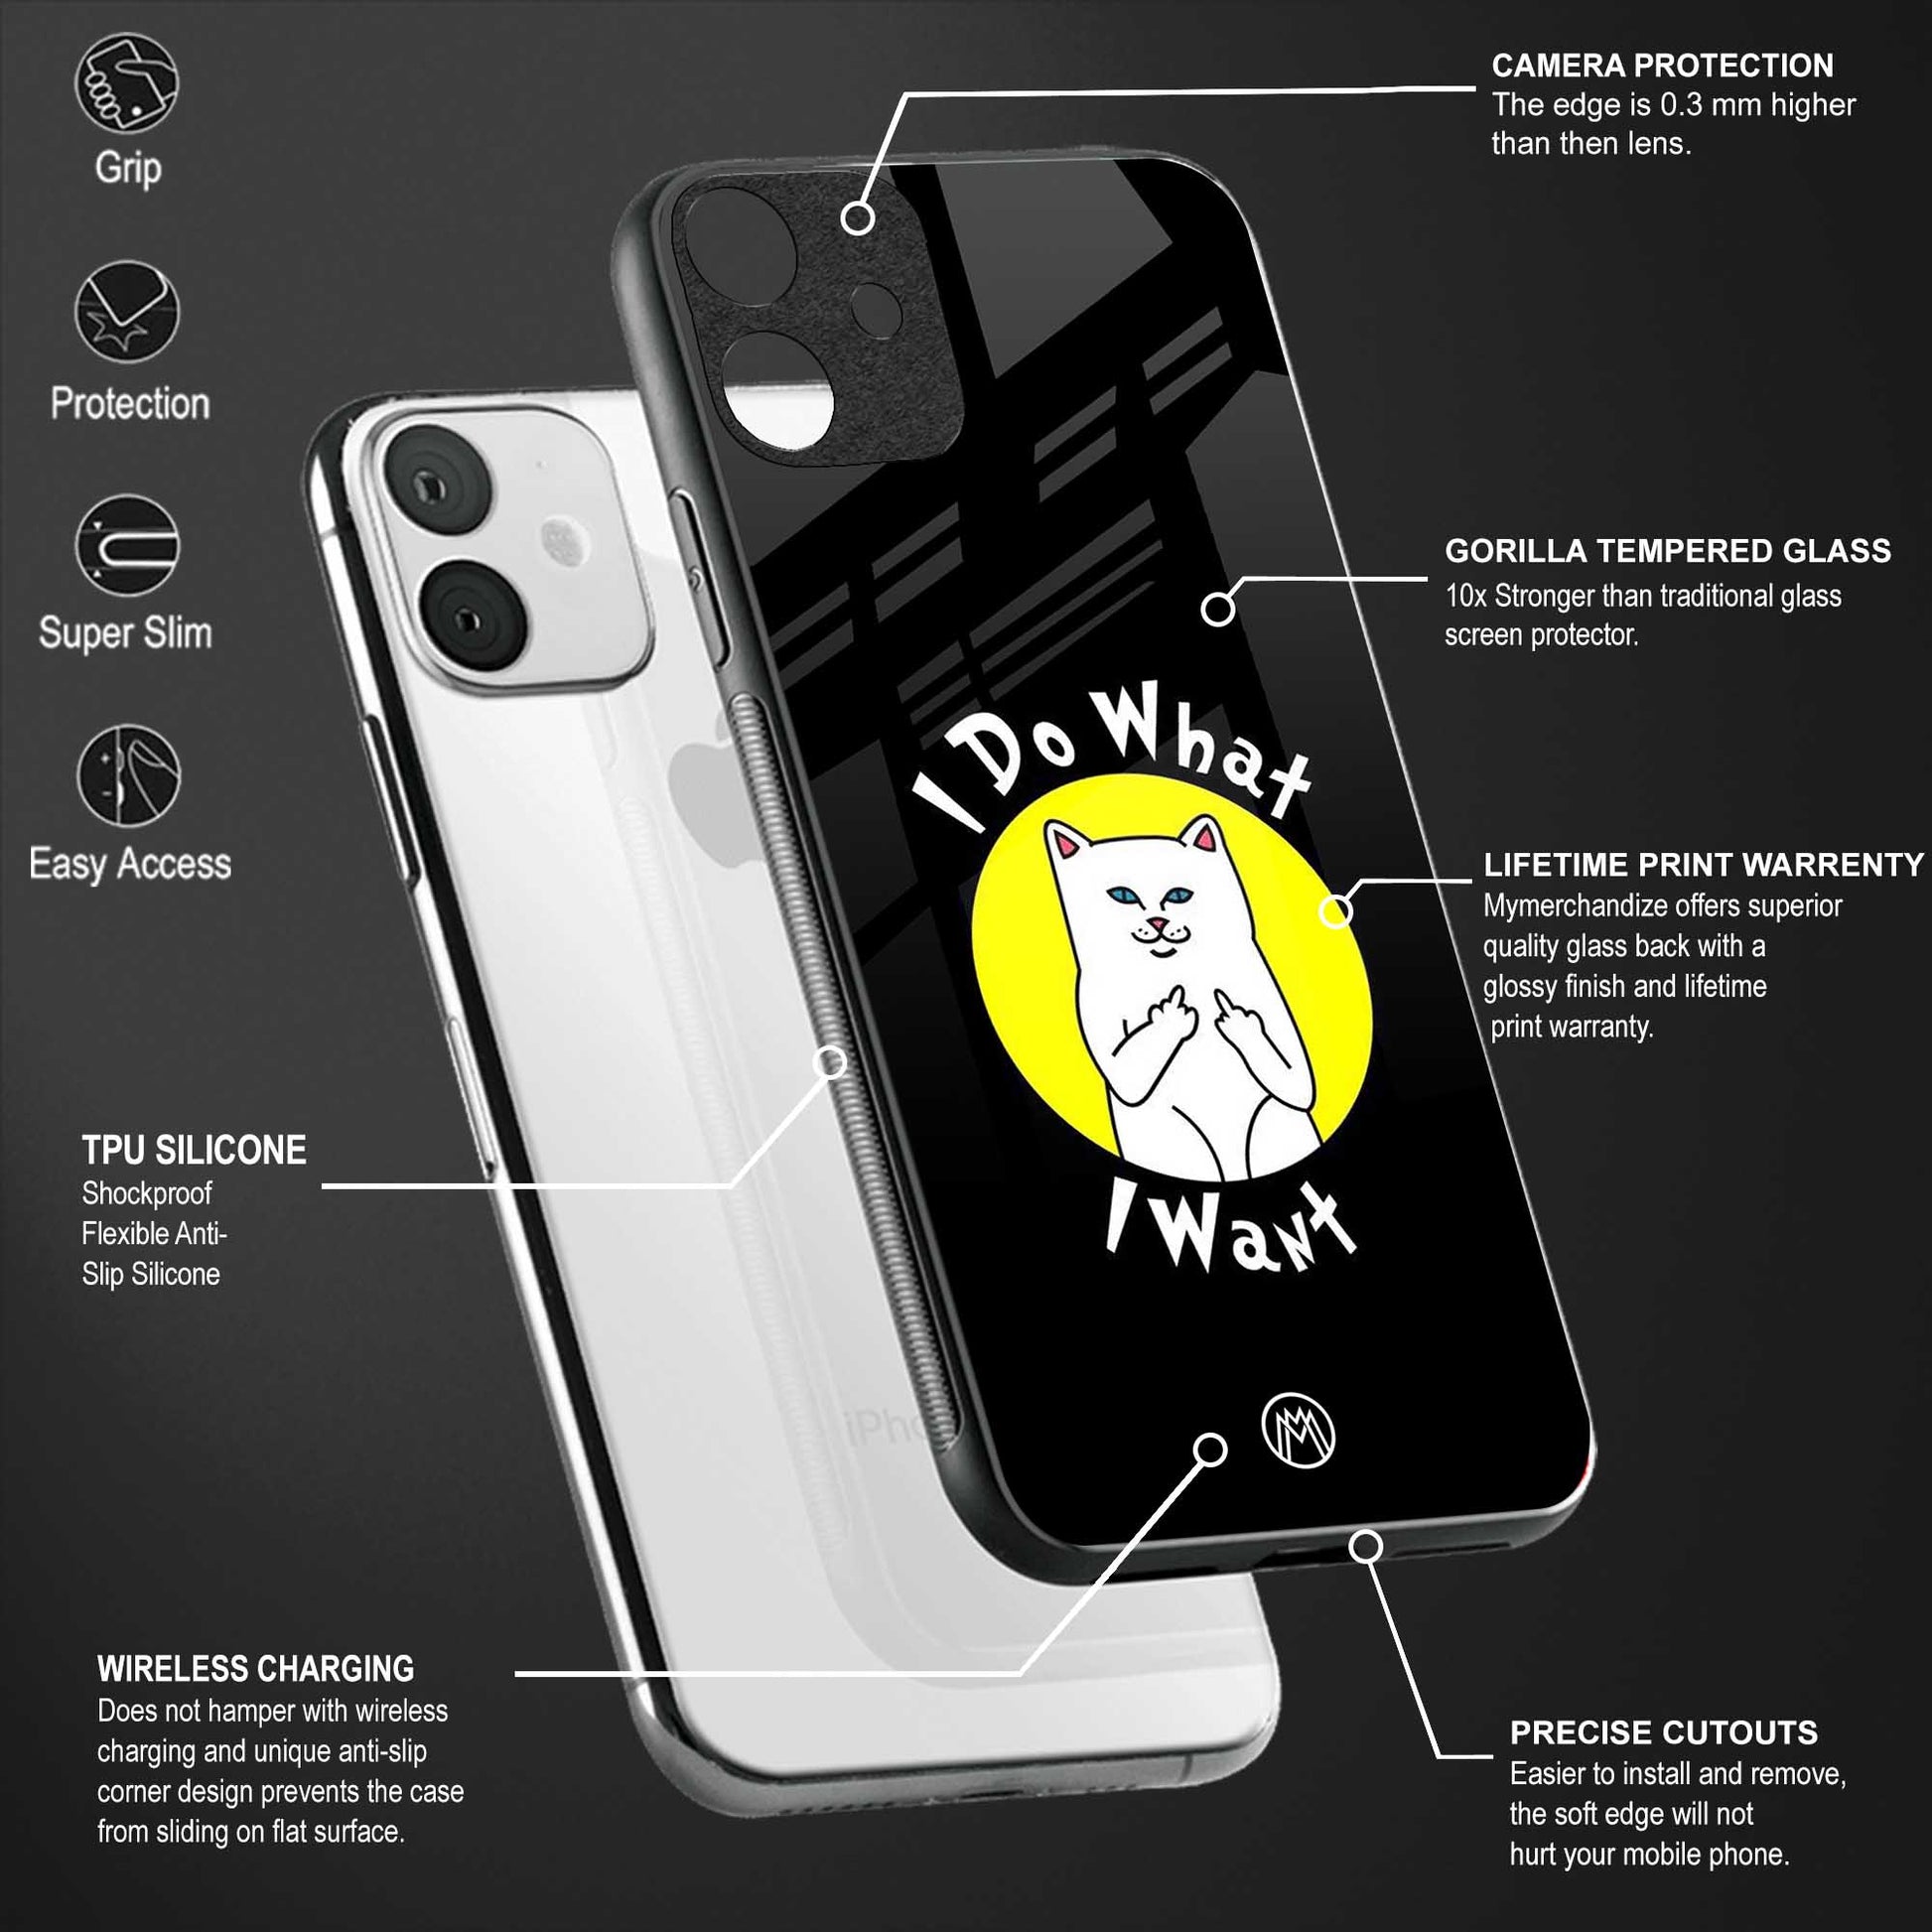 i do what i want glass case for samsung galaxy s10 plus